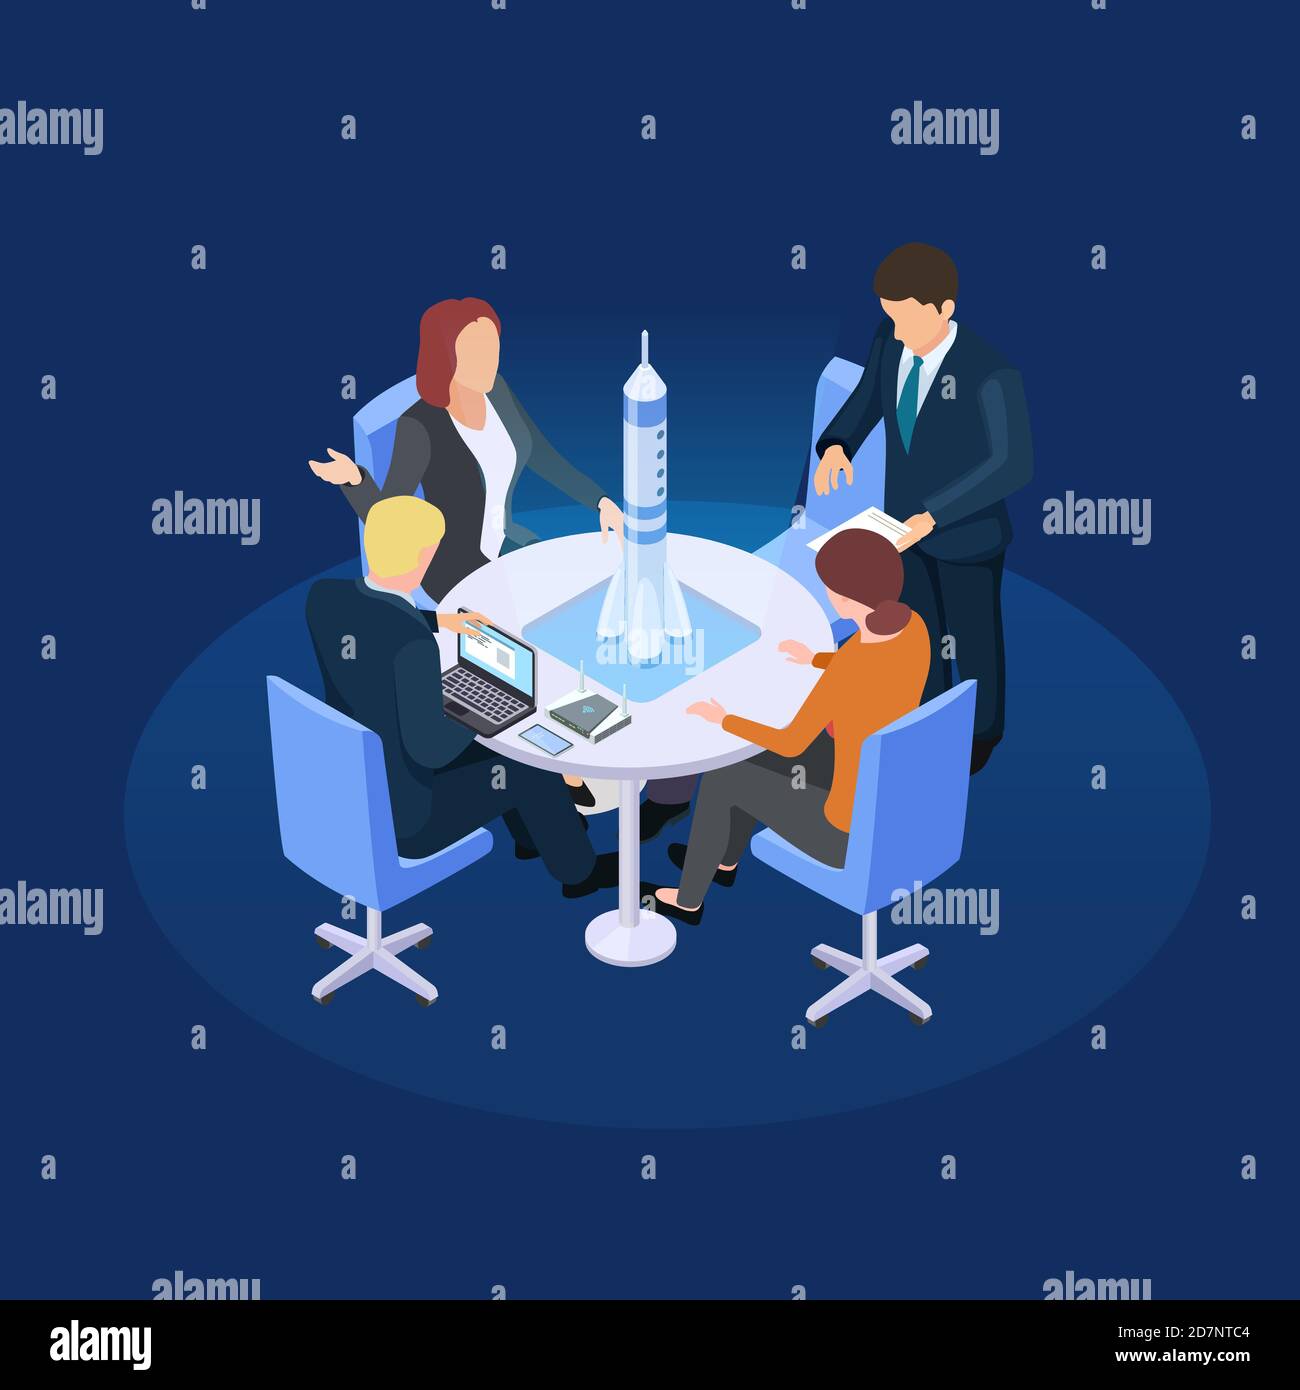 Isometric spaceship vector presentation. Spacecraft development and businessproject illustration. Illustration of spacecraft launch, technology 3d flight Stock Vector